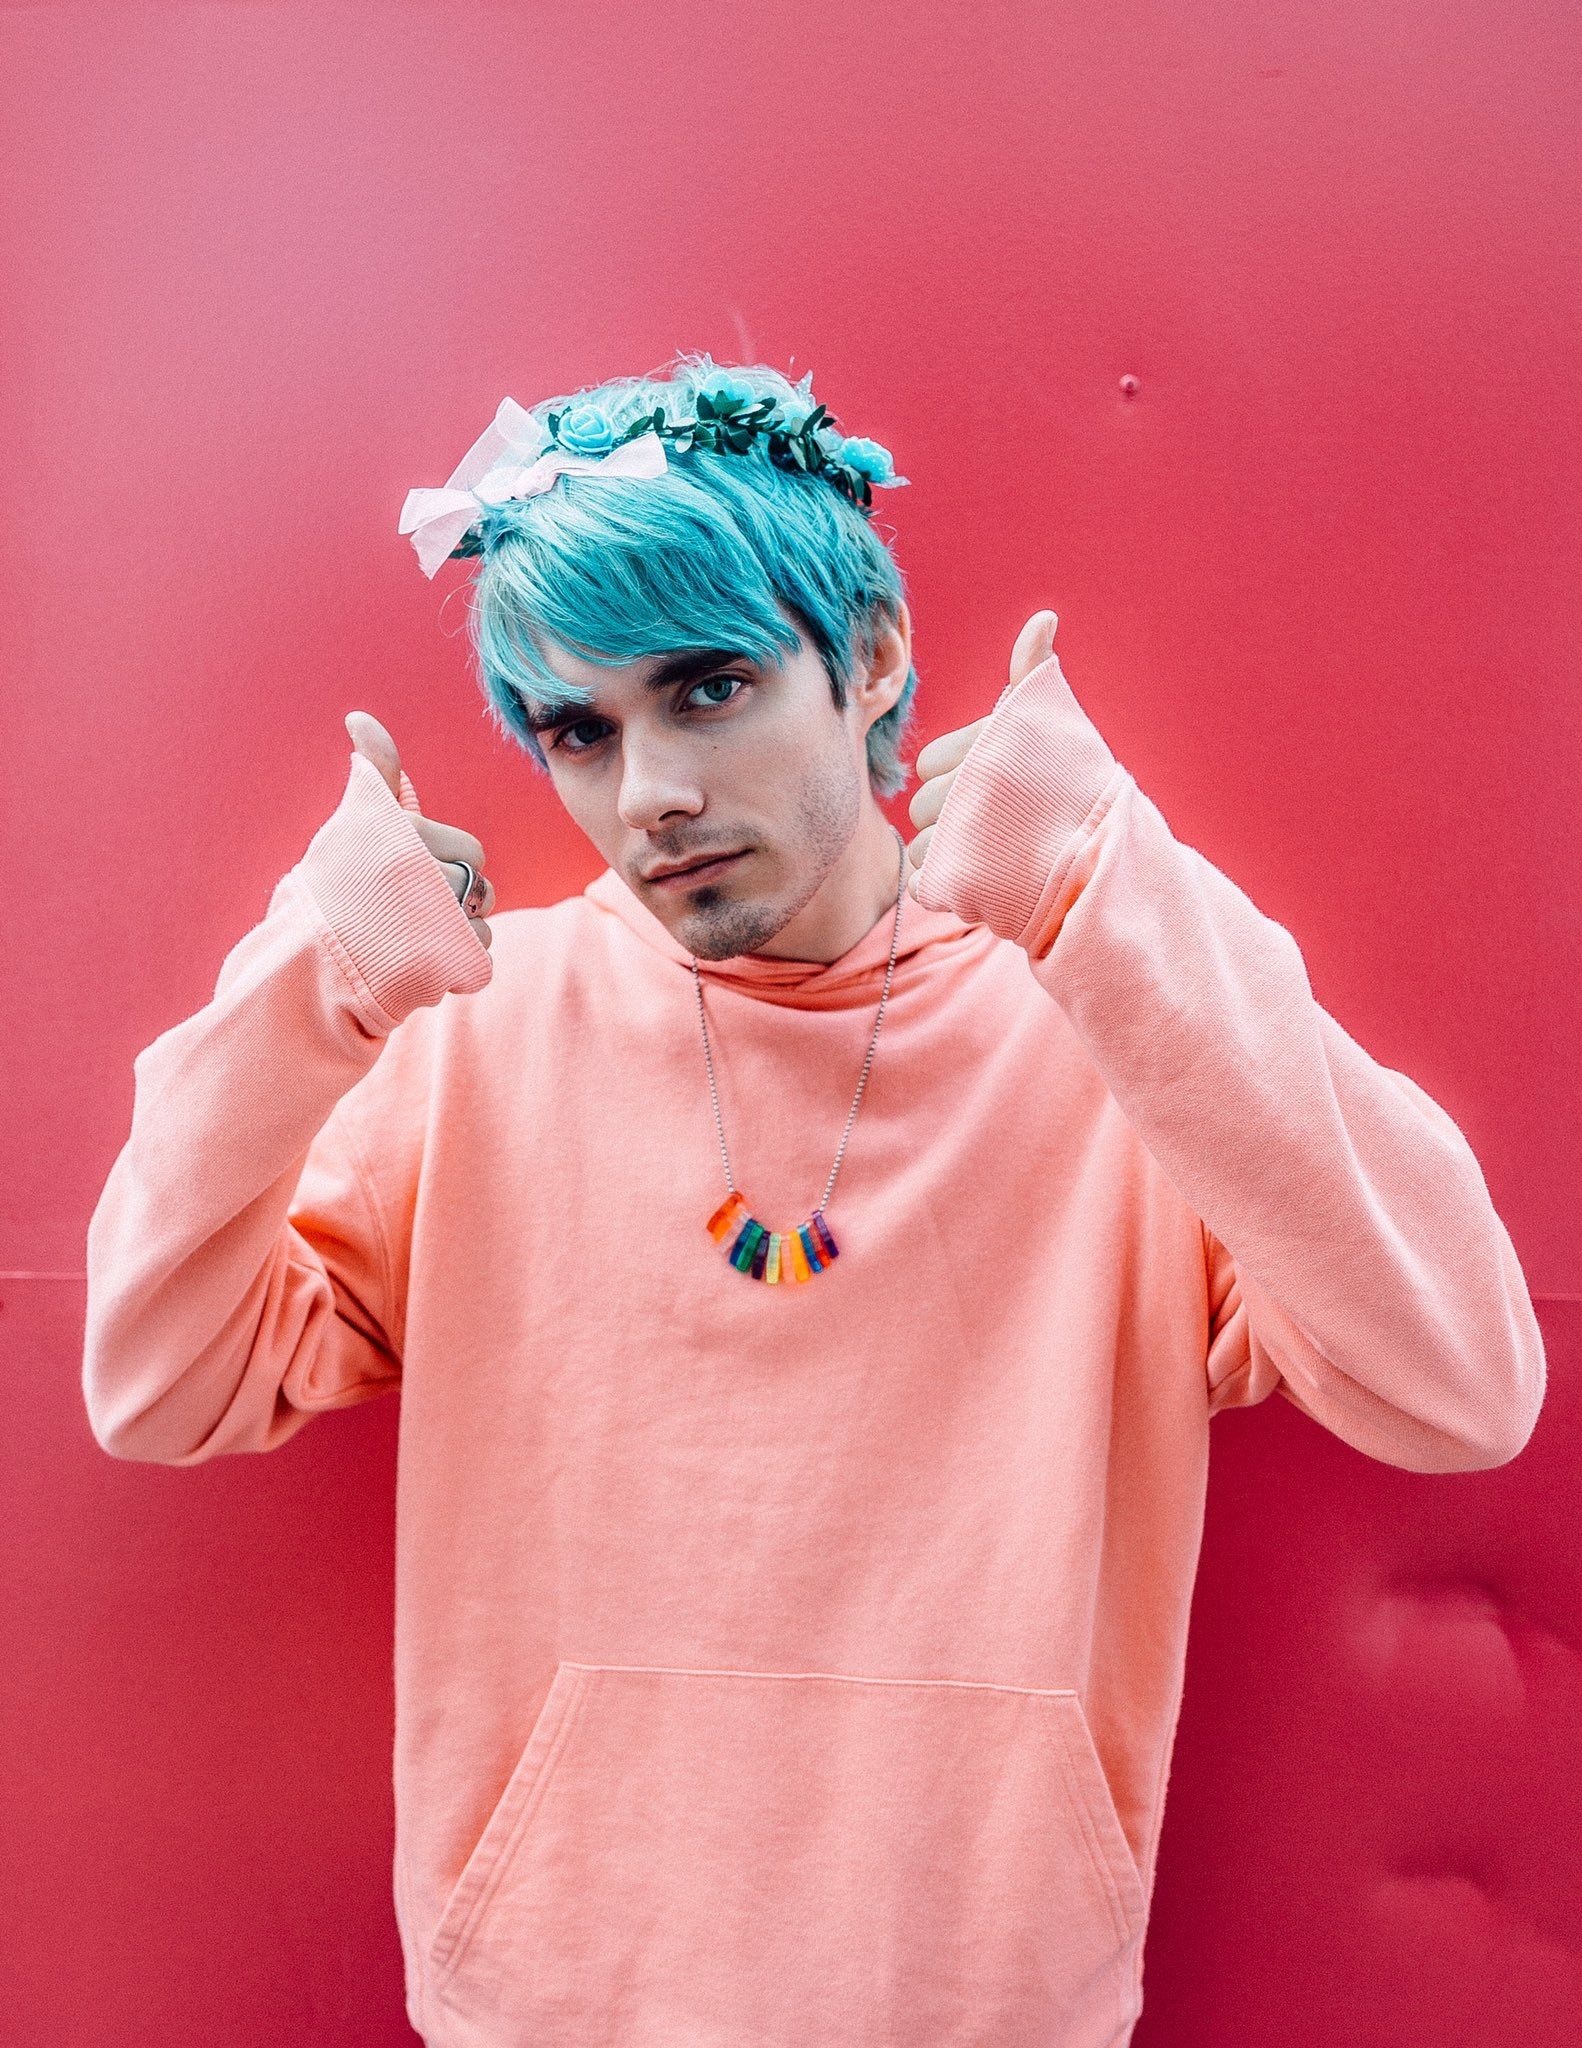 Pin by jasmine oliveira on bands | Awsten knight, Waterparks band, Otto wood 1590x2050